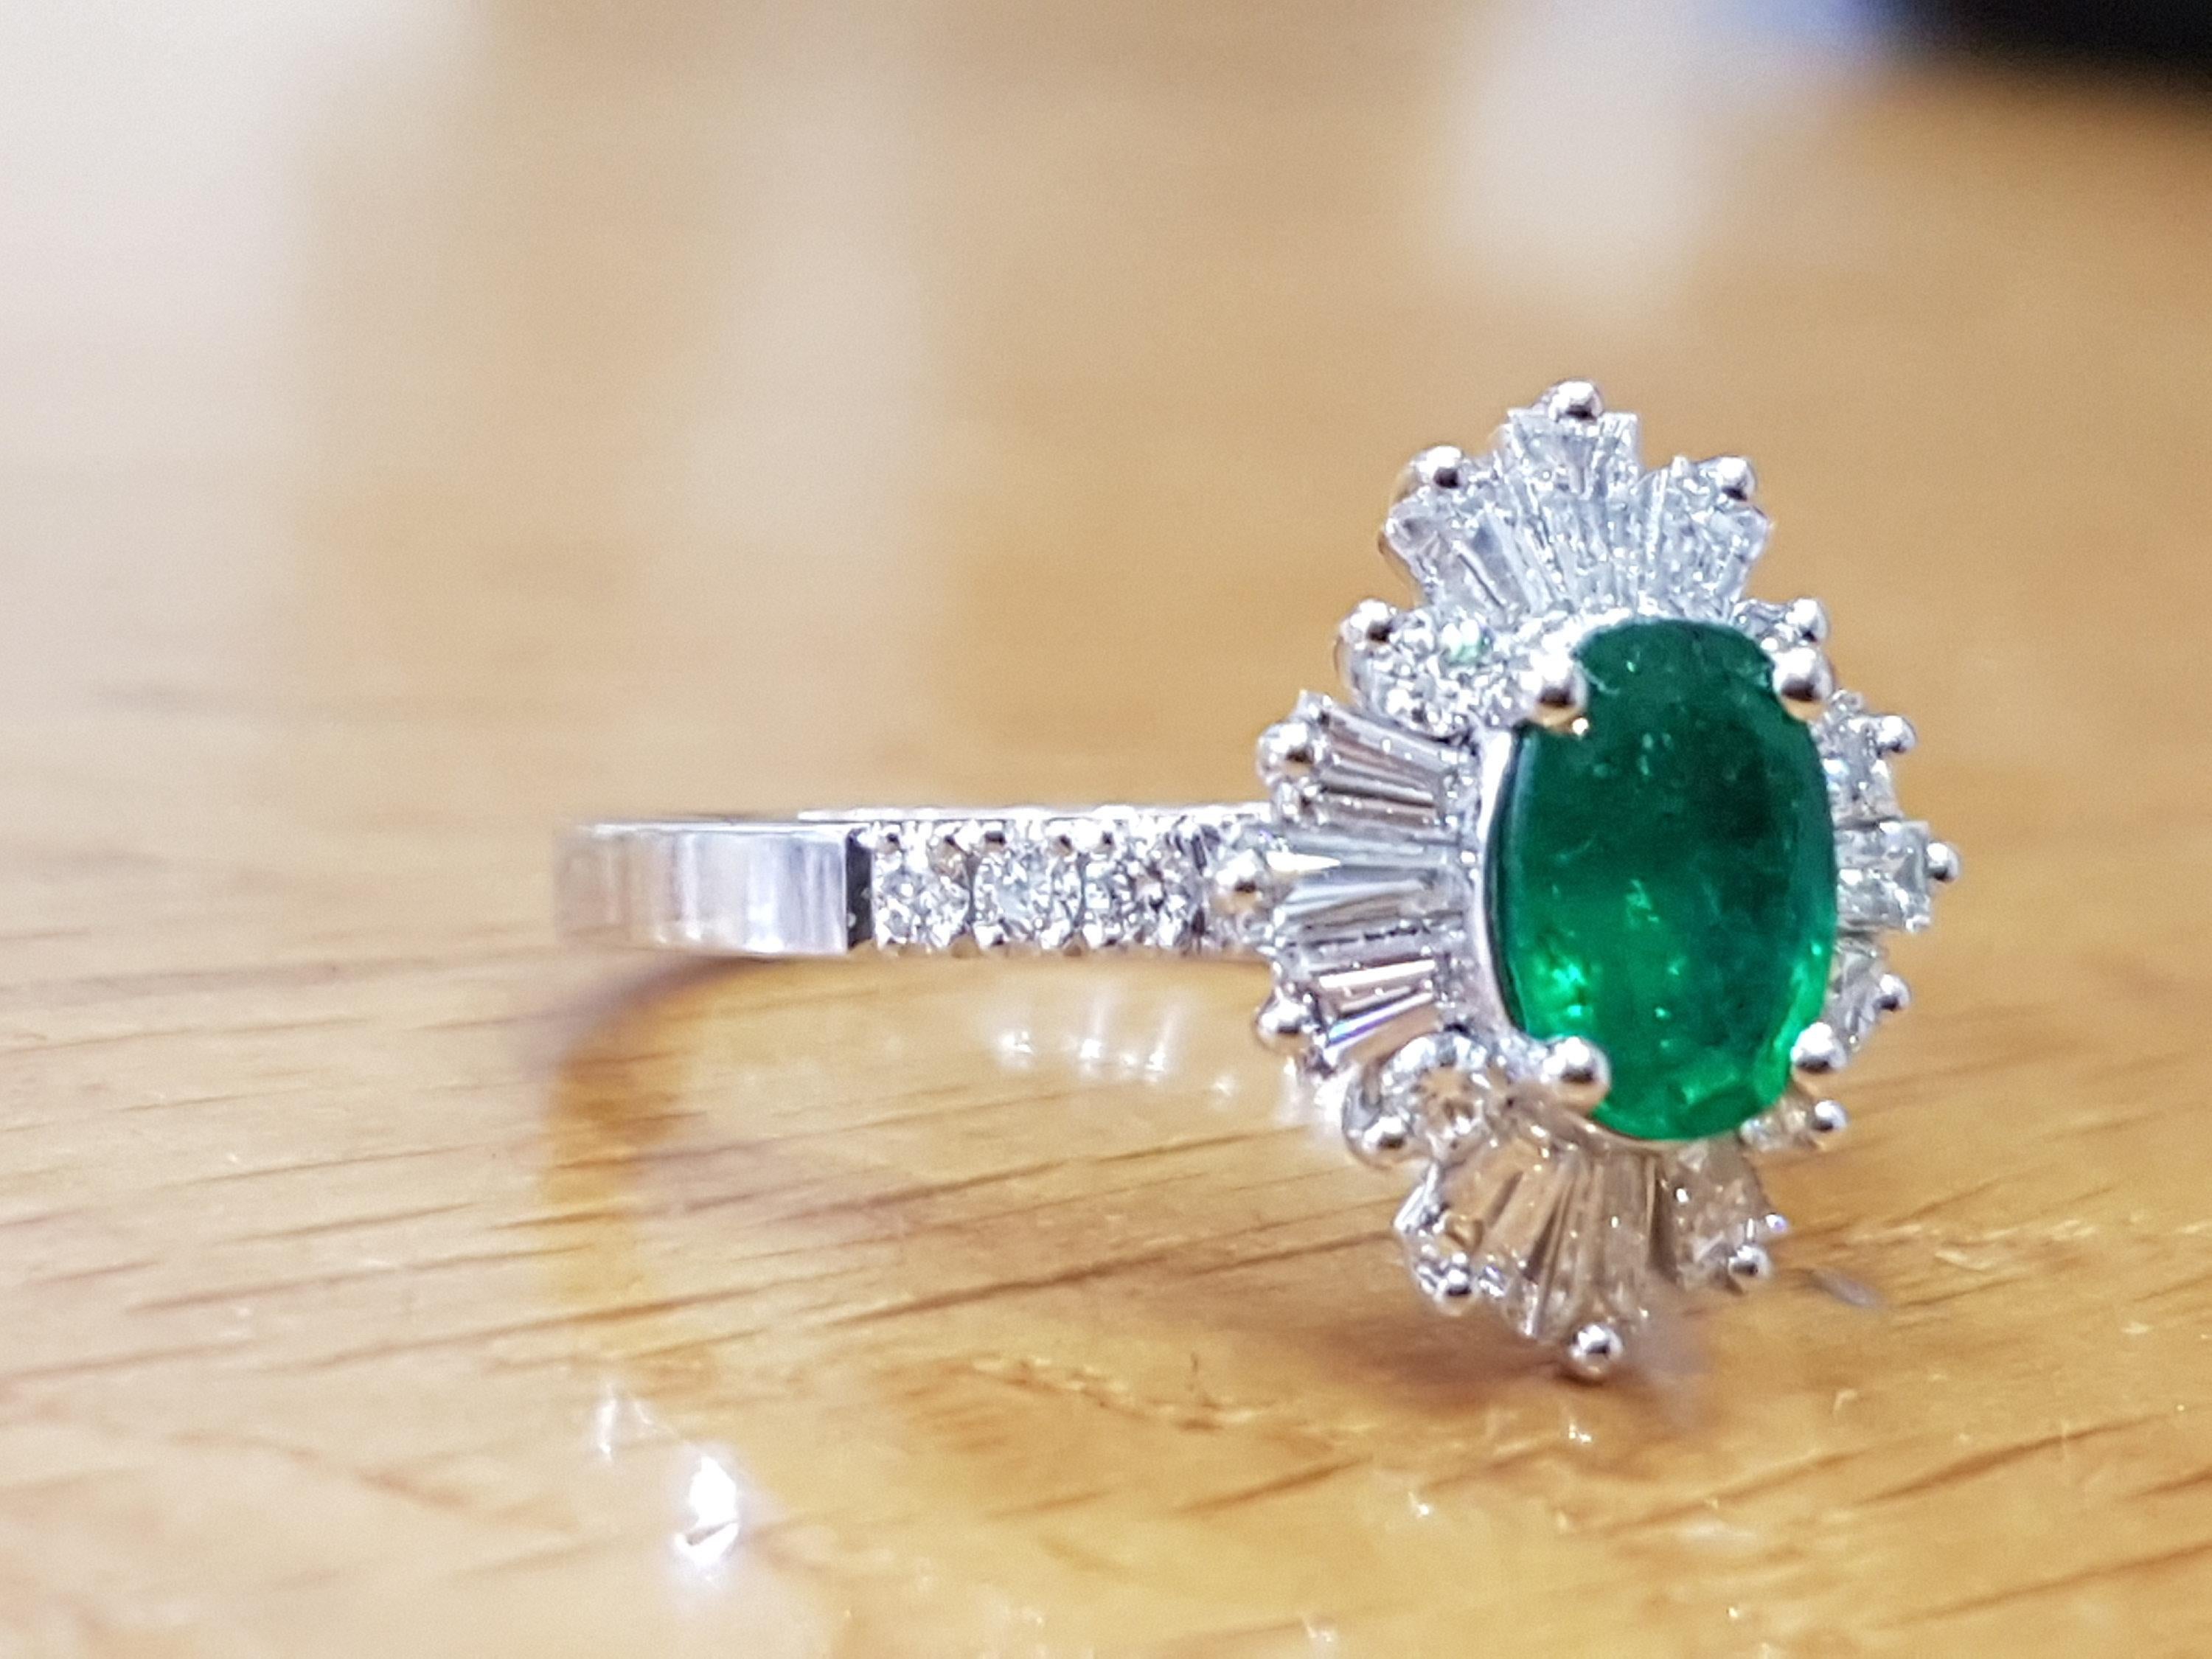 This beautiful Halo with accents vintage promise ring is made of 14k white gold with an oval-cut central Emerald which is accompanied by meticulously crafted melee round and baguette tapered cut diamonds . This high quality Halo pave style solitaire